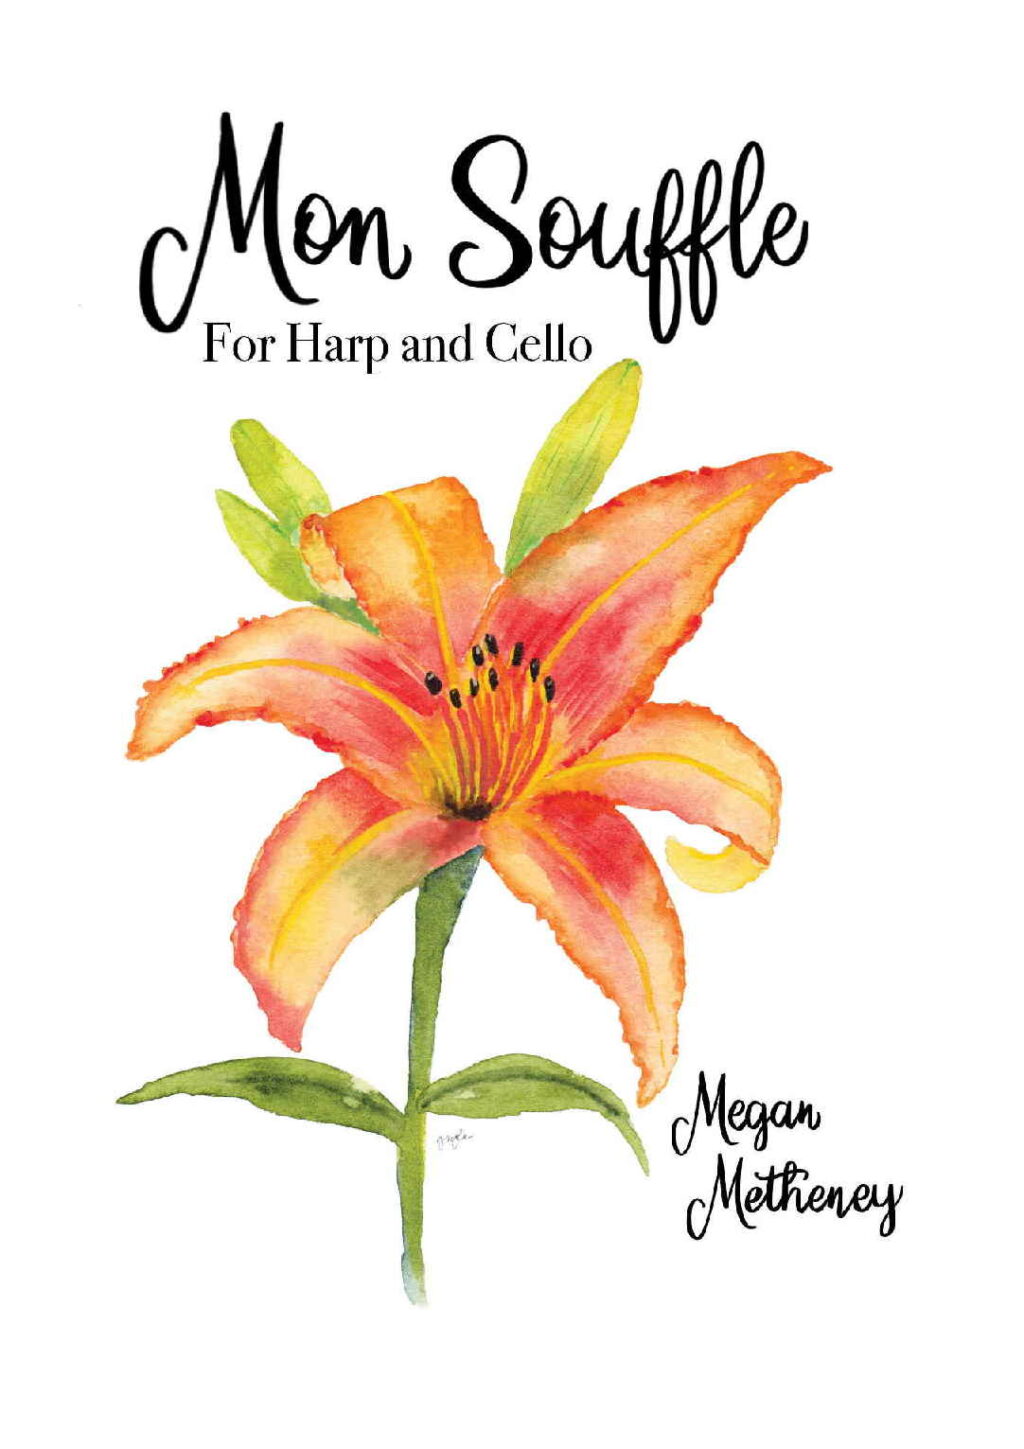 Mon Souffle by Metheney Cover at folkharp.com